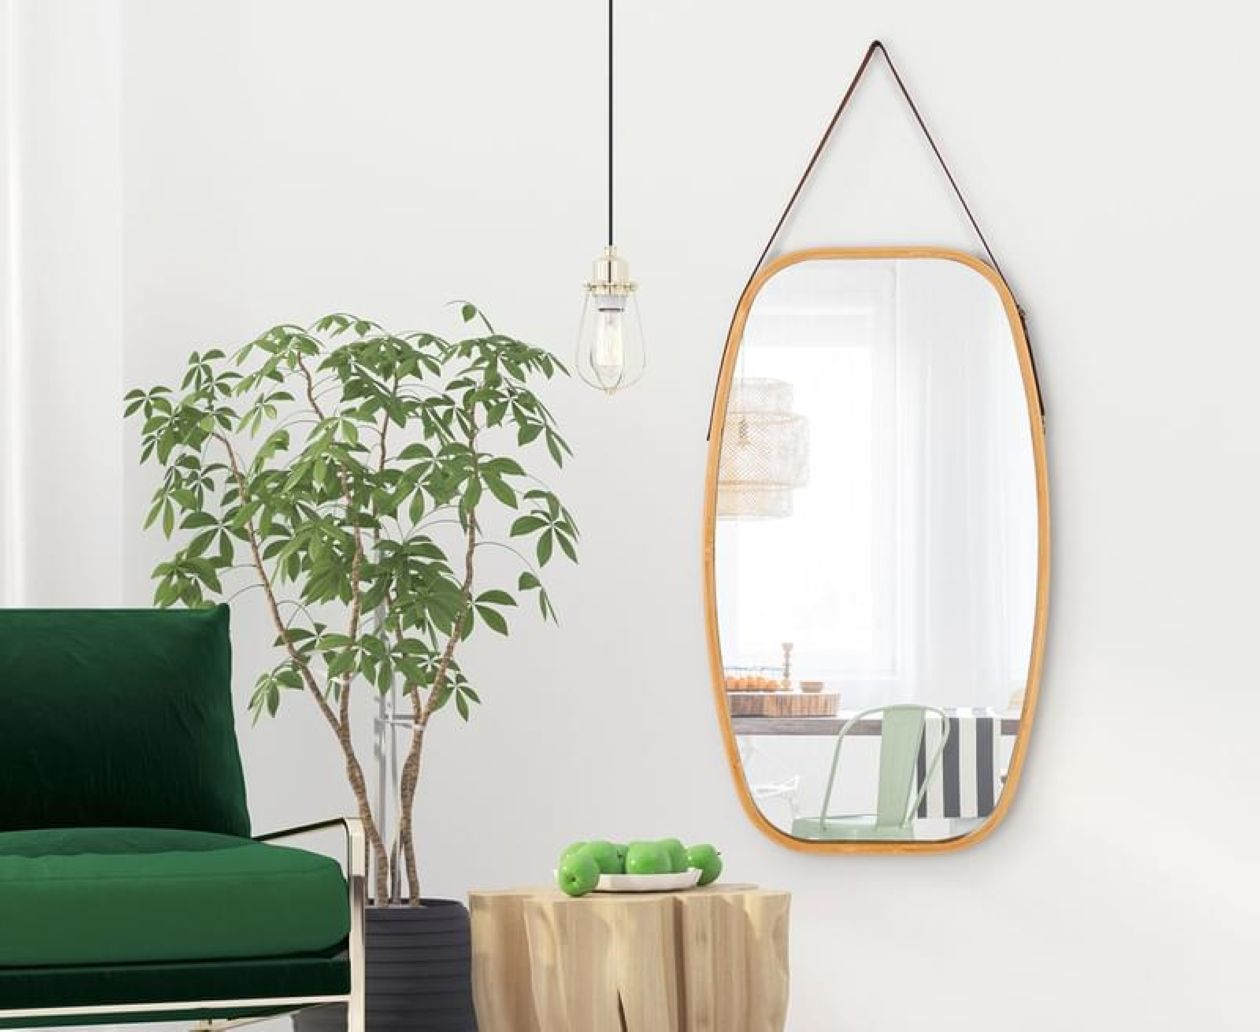 Hanging Full Length Wall Mirror - Solid Bamboo Frame and Adjustable Leather Strap for Bathroom and Bedroom - BM House & Garden